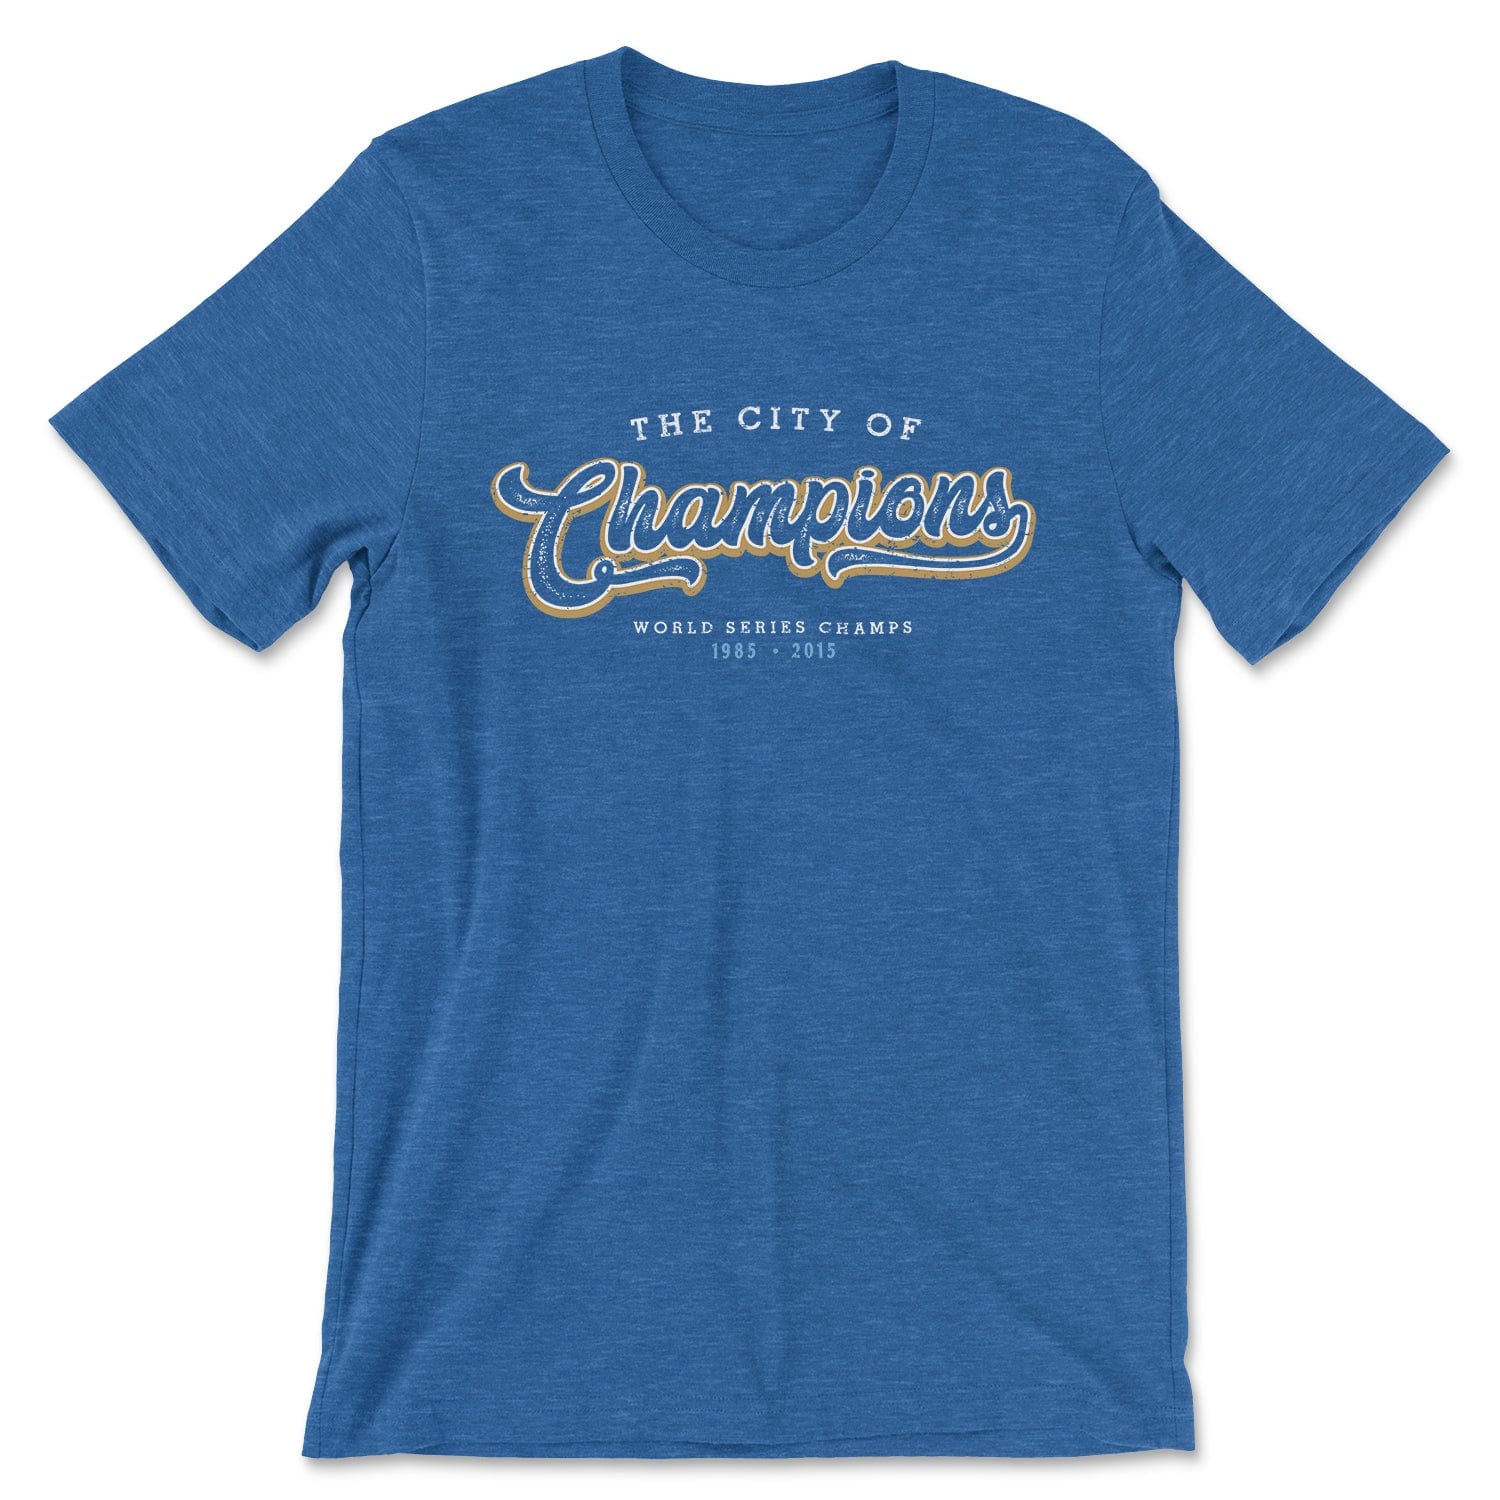 KC Swag Kansas City Royals white/gold CITY OF CHAMPIONS on heather blue t-shirt